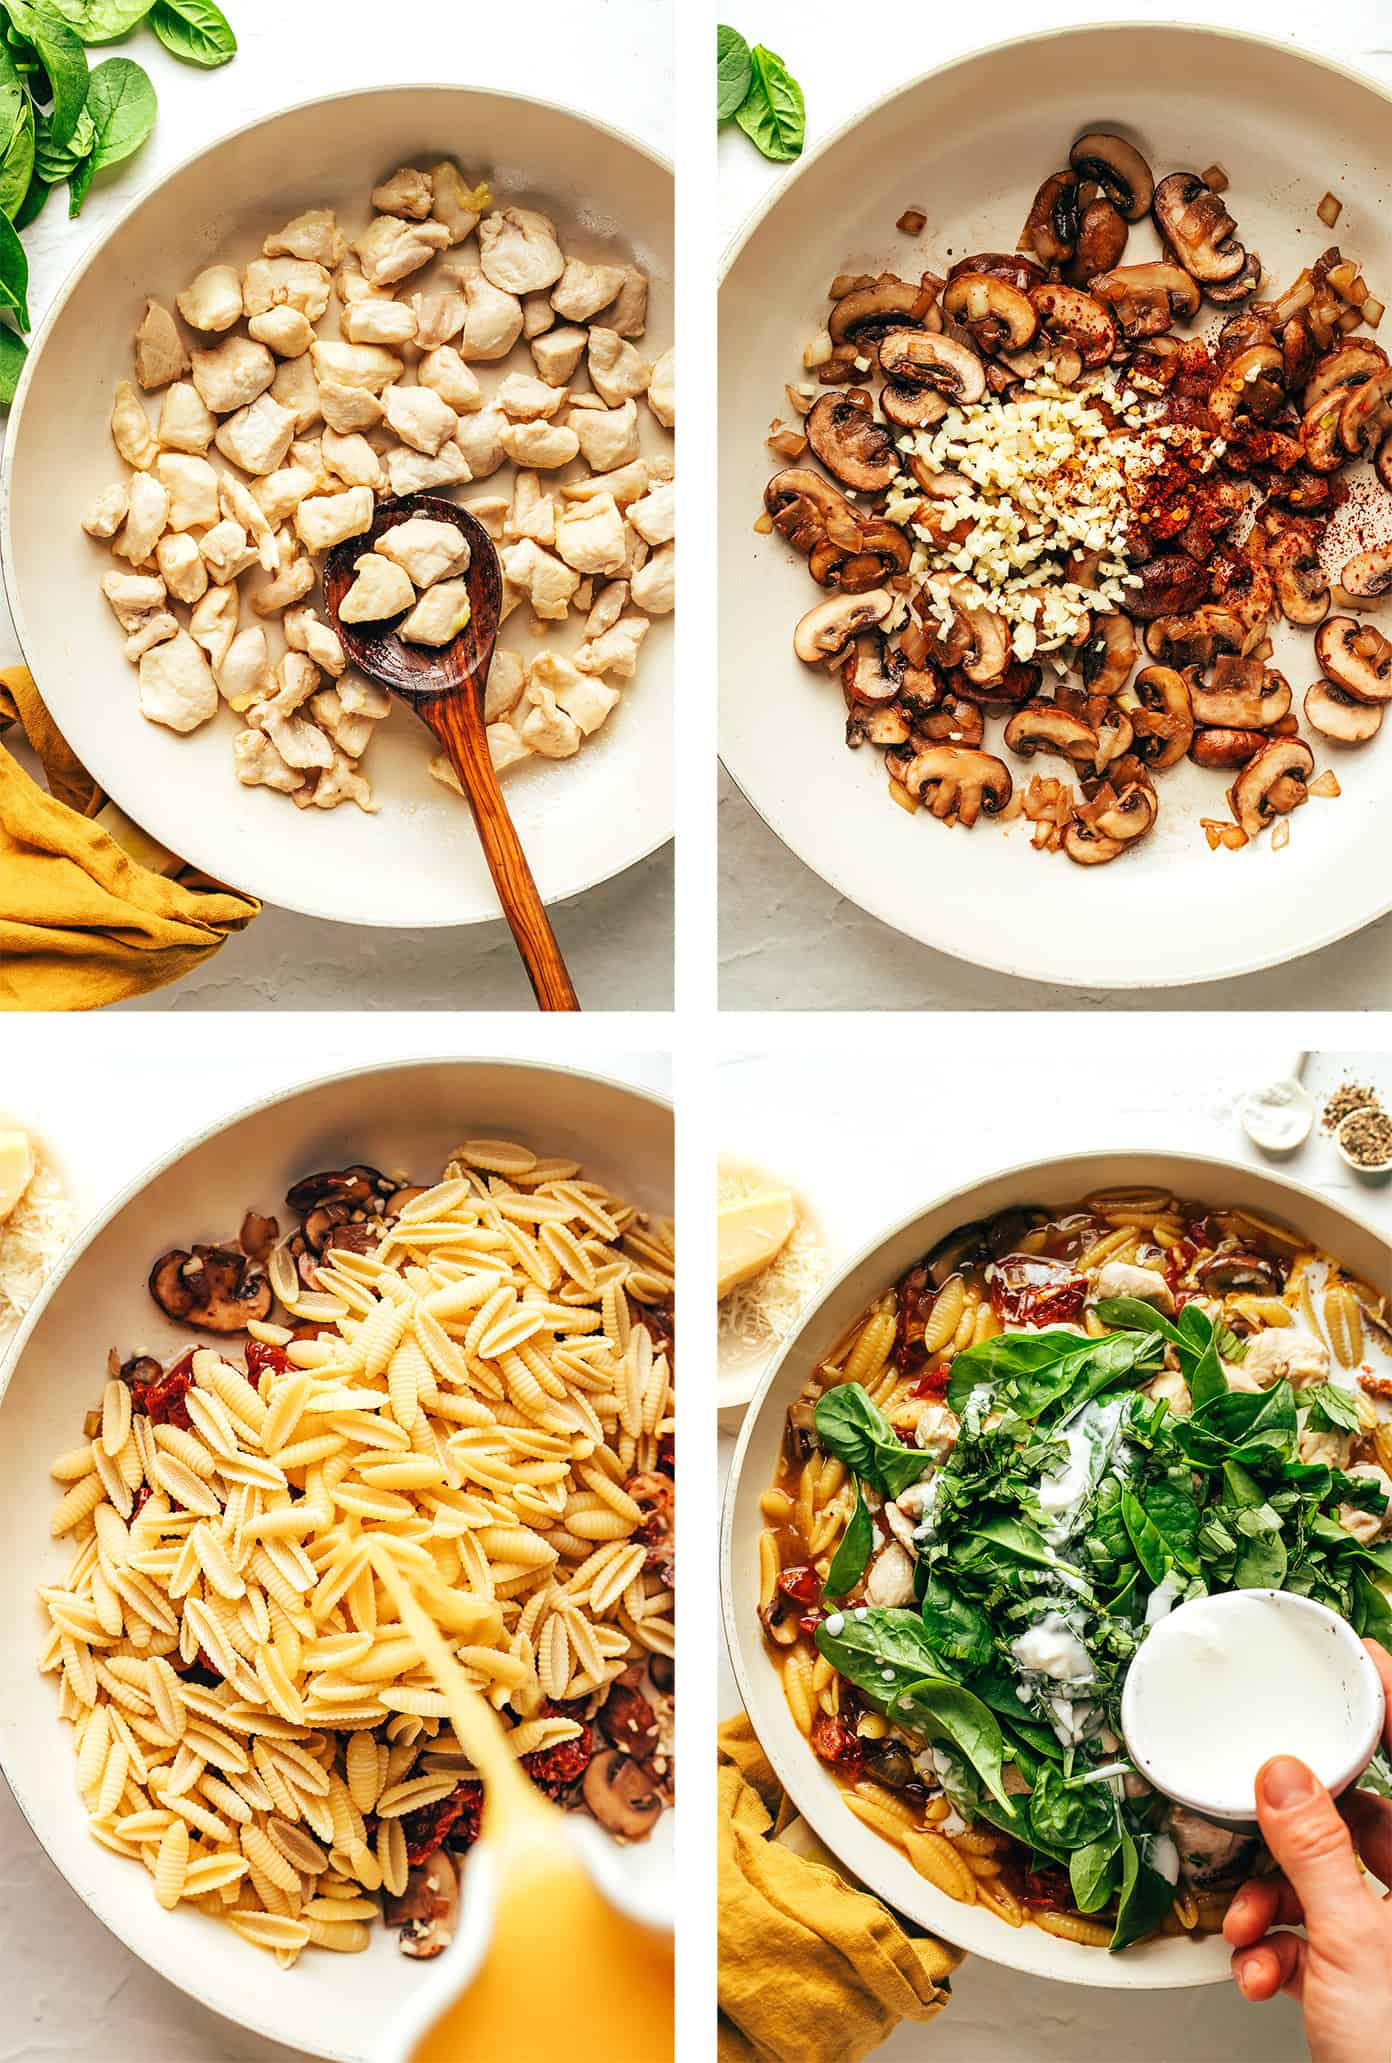 Step by step photos showing how to make this one pot pasta